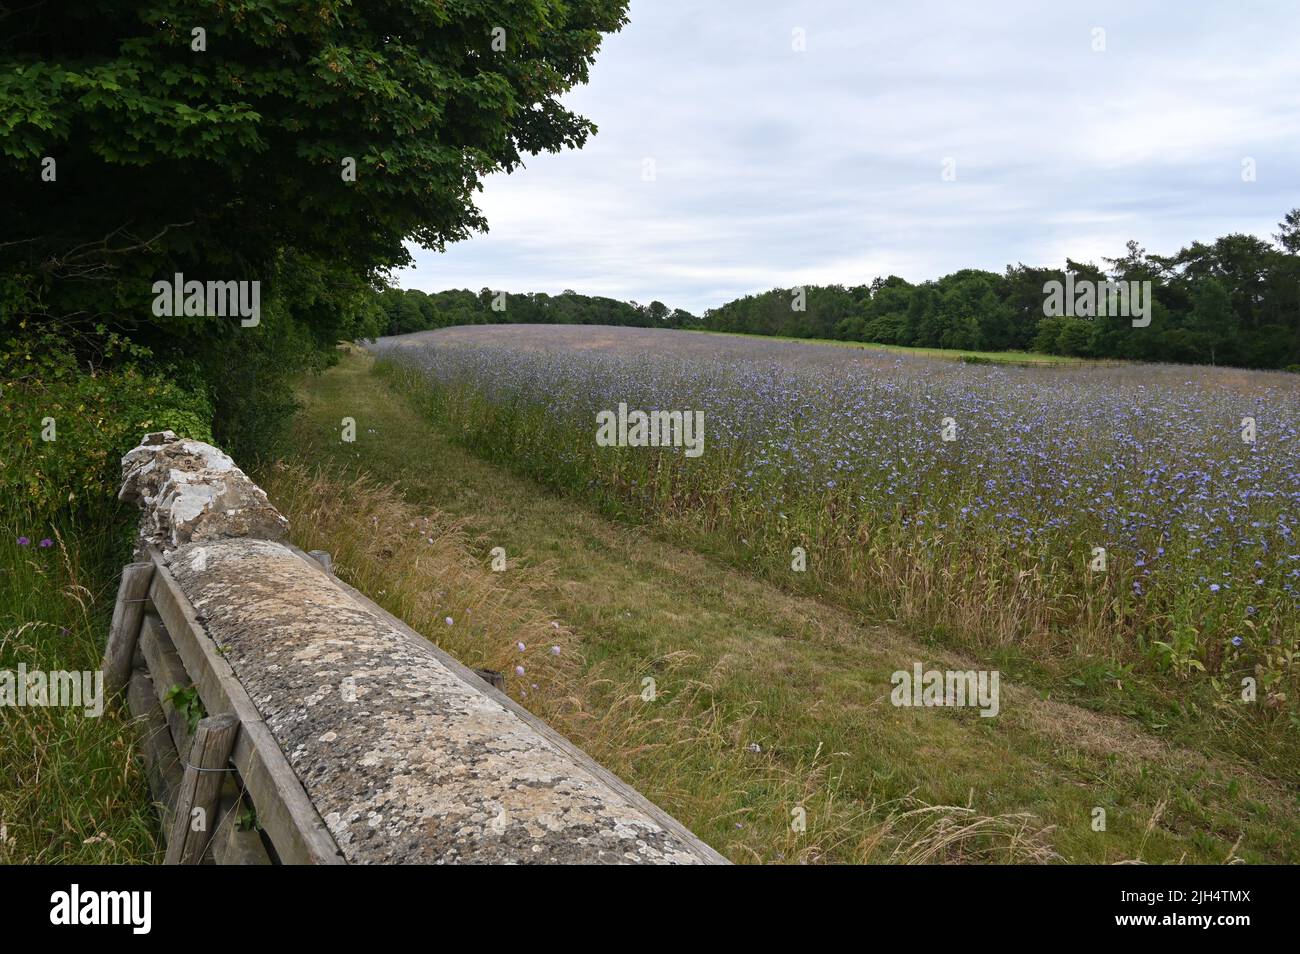 Field of cornflowers in flower in a field near the Cotswold village of Lower Swell, Gloucestershire. A hunt jump is visible in the foreground. Stock Photo